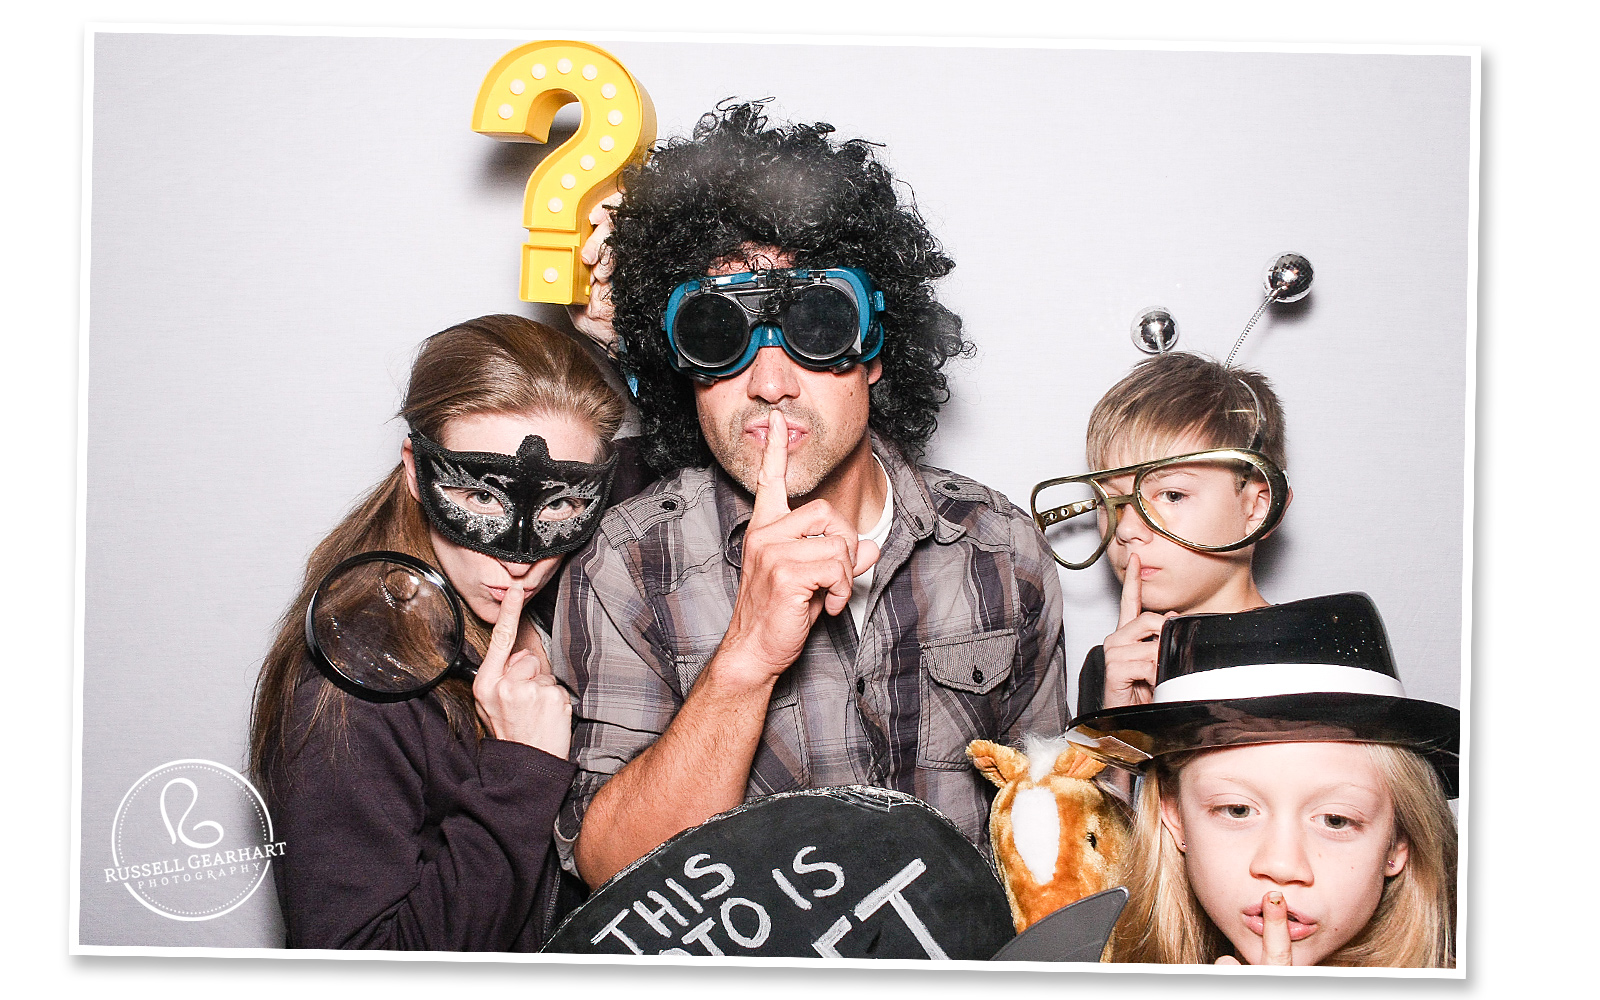 Pasadena Public Library Photobooth: Pseudonymous Bosch – Russell Gearhart Photography – www.gearhartphoto.com